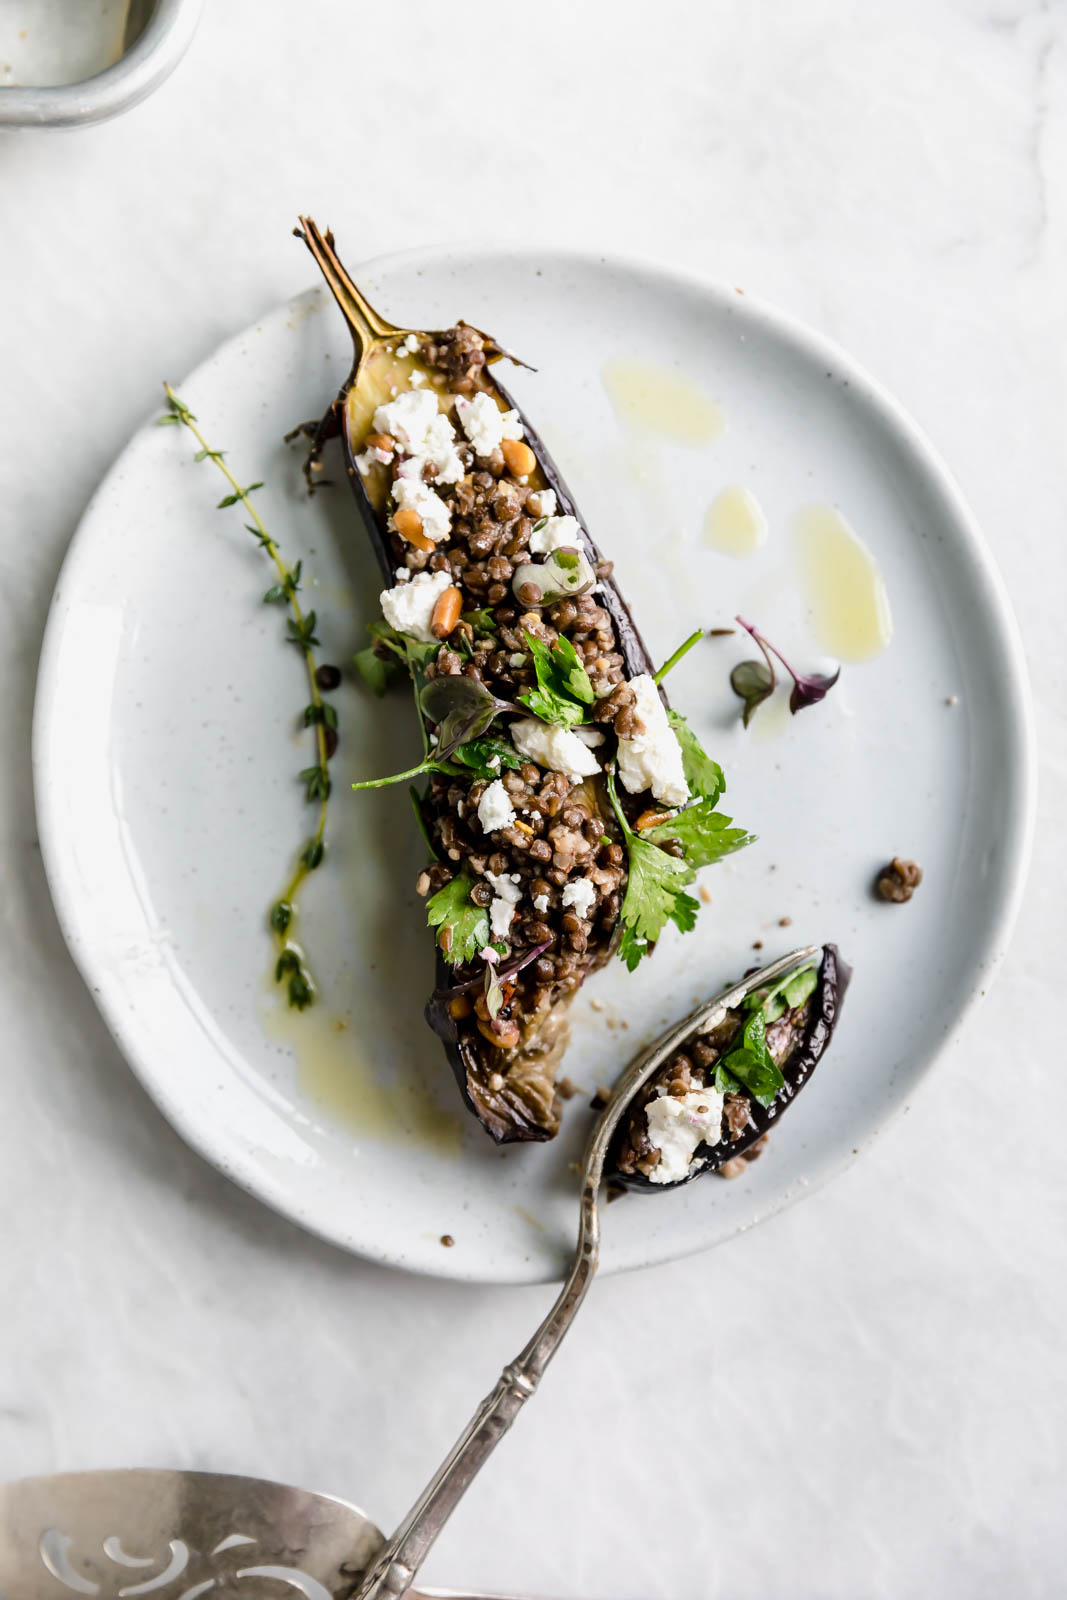 Recipe For Roasted Eggplant With Lentils